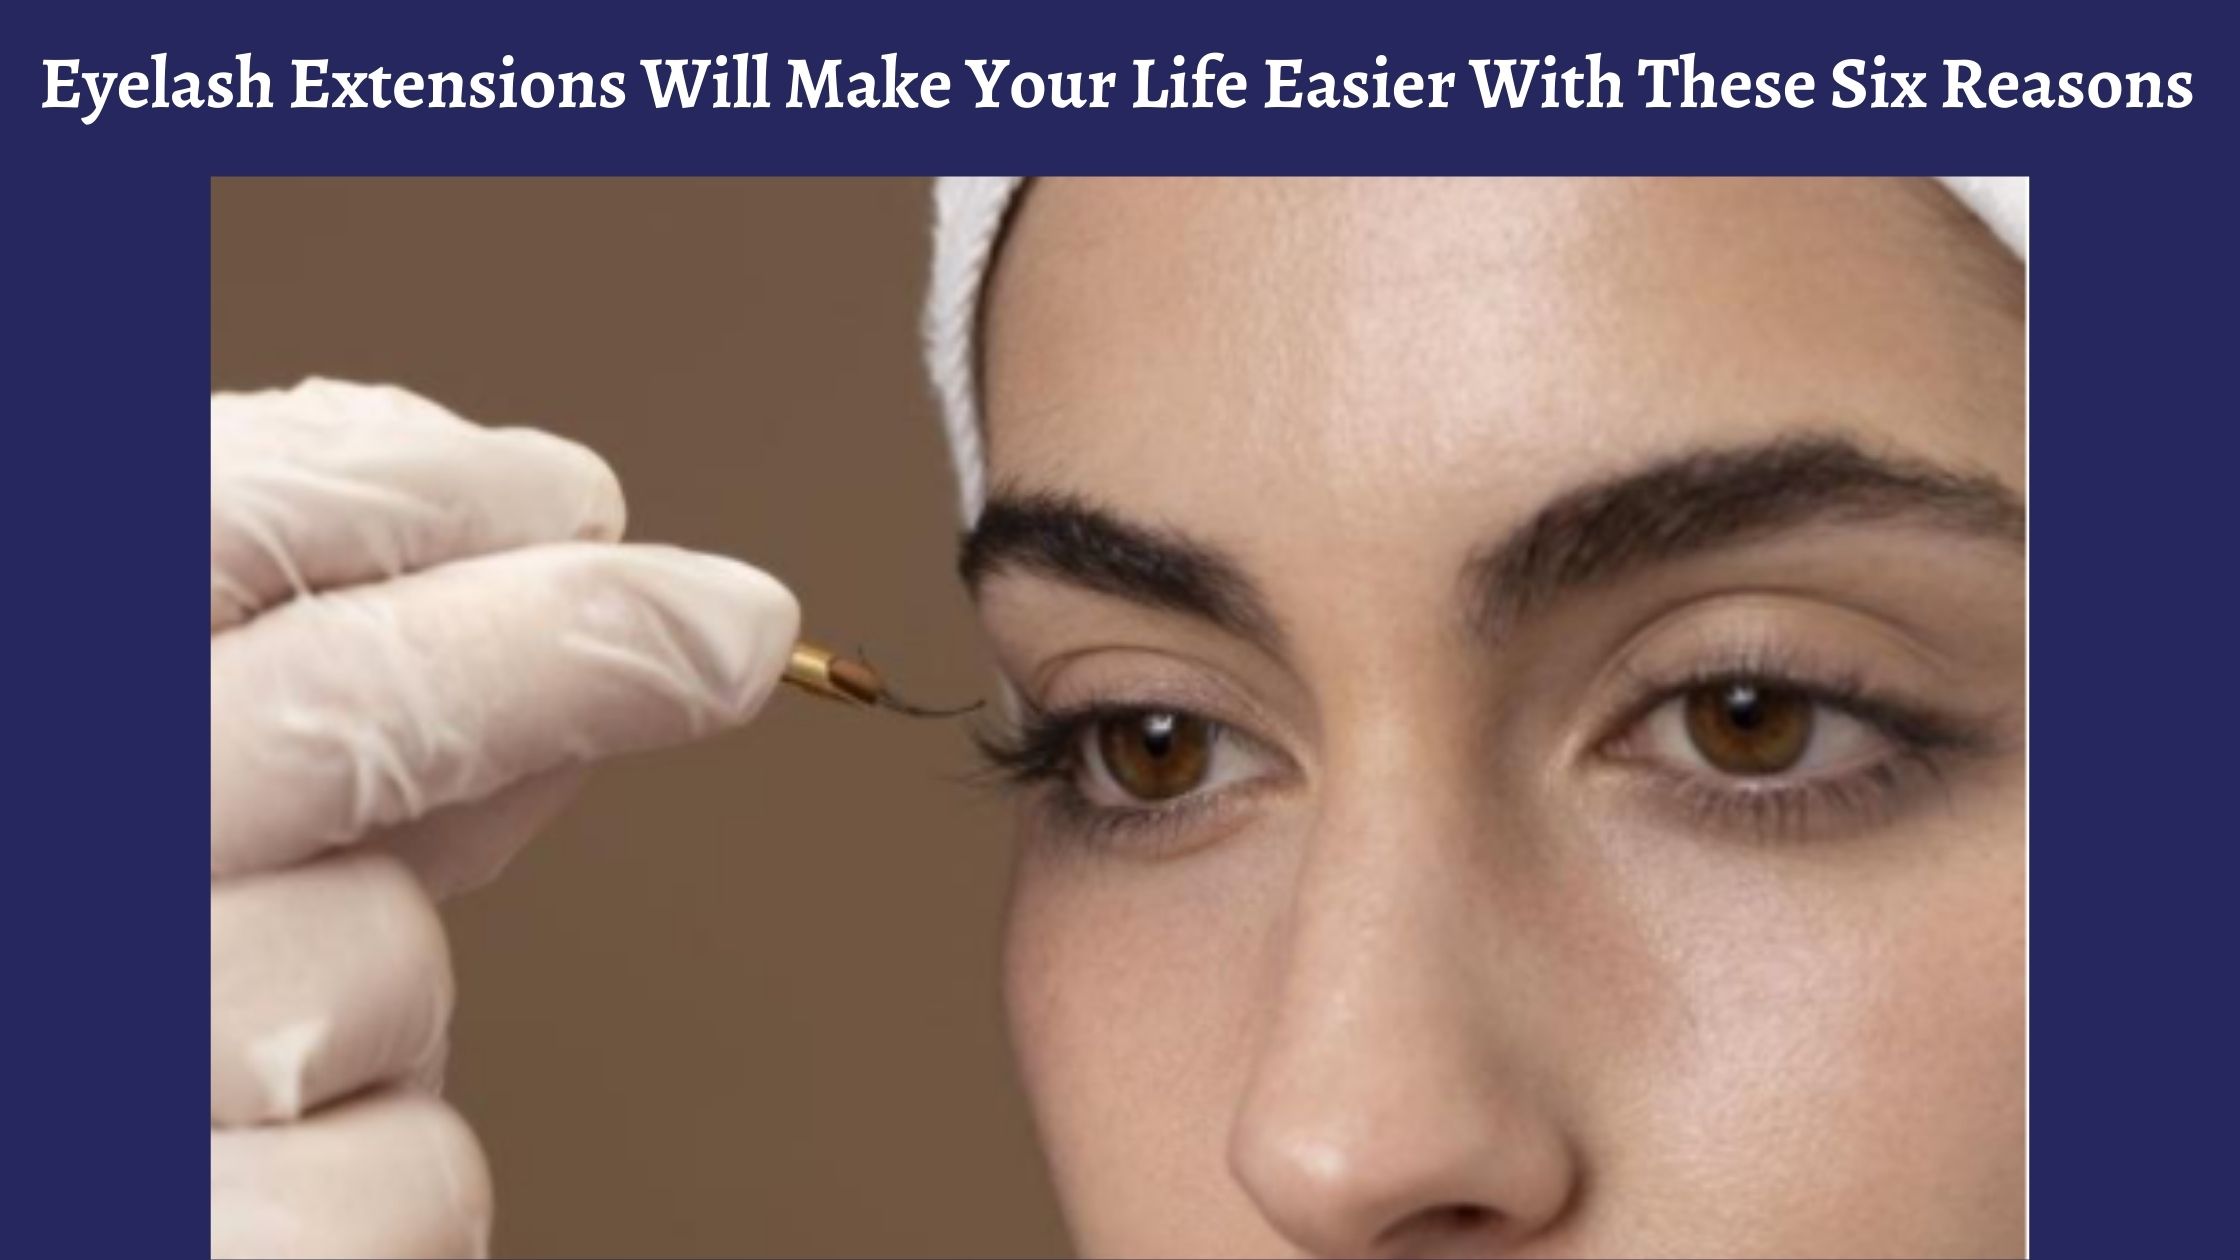 Eyelash Extensions Will Make Your Life Easier With These Six Reasons